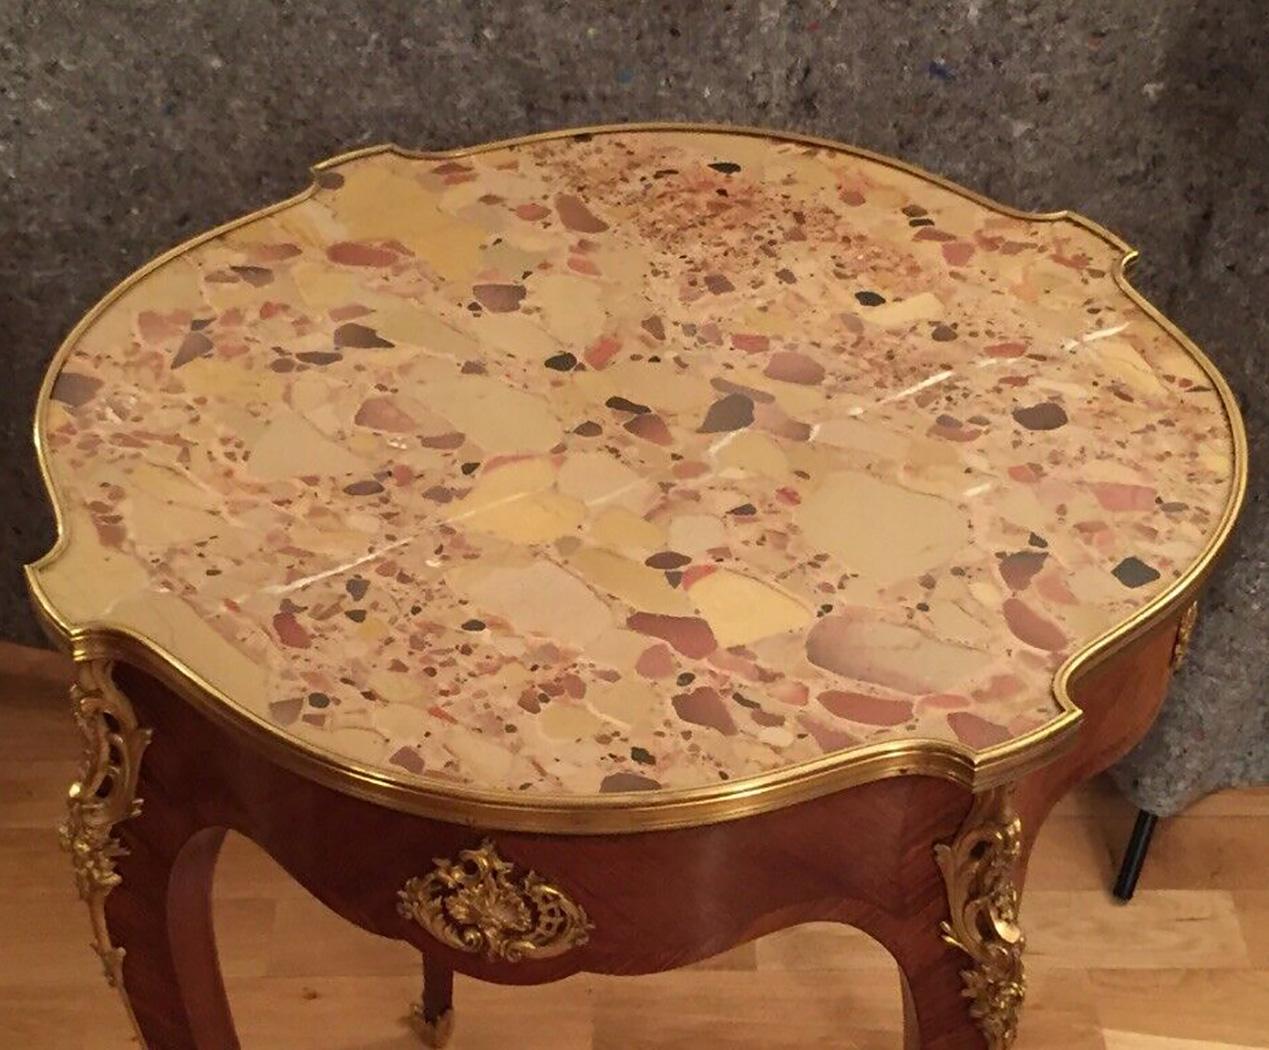 Gueridon,
Side table by Baur, Gass & Schamber, Paris, Circa 1870
Louis XV / Rococo Style.
Kingwood crossbanded applied veneer with mercury gilt bronze applications. Having a polished Italian Marble top of Rosso Veneto. Kingwood is the precios